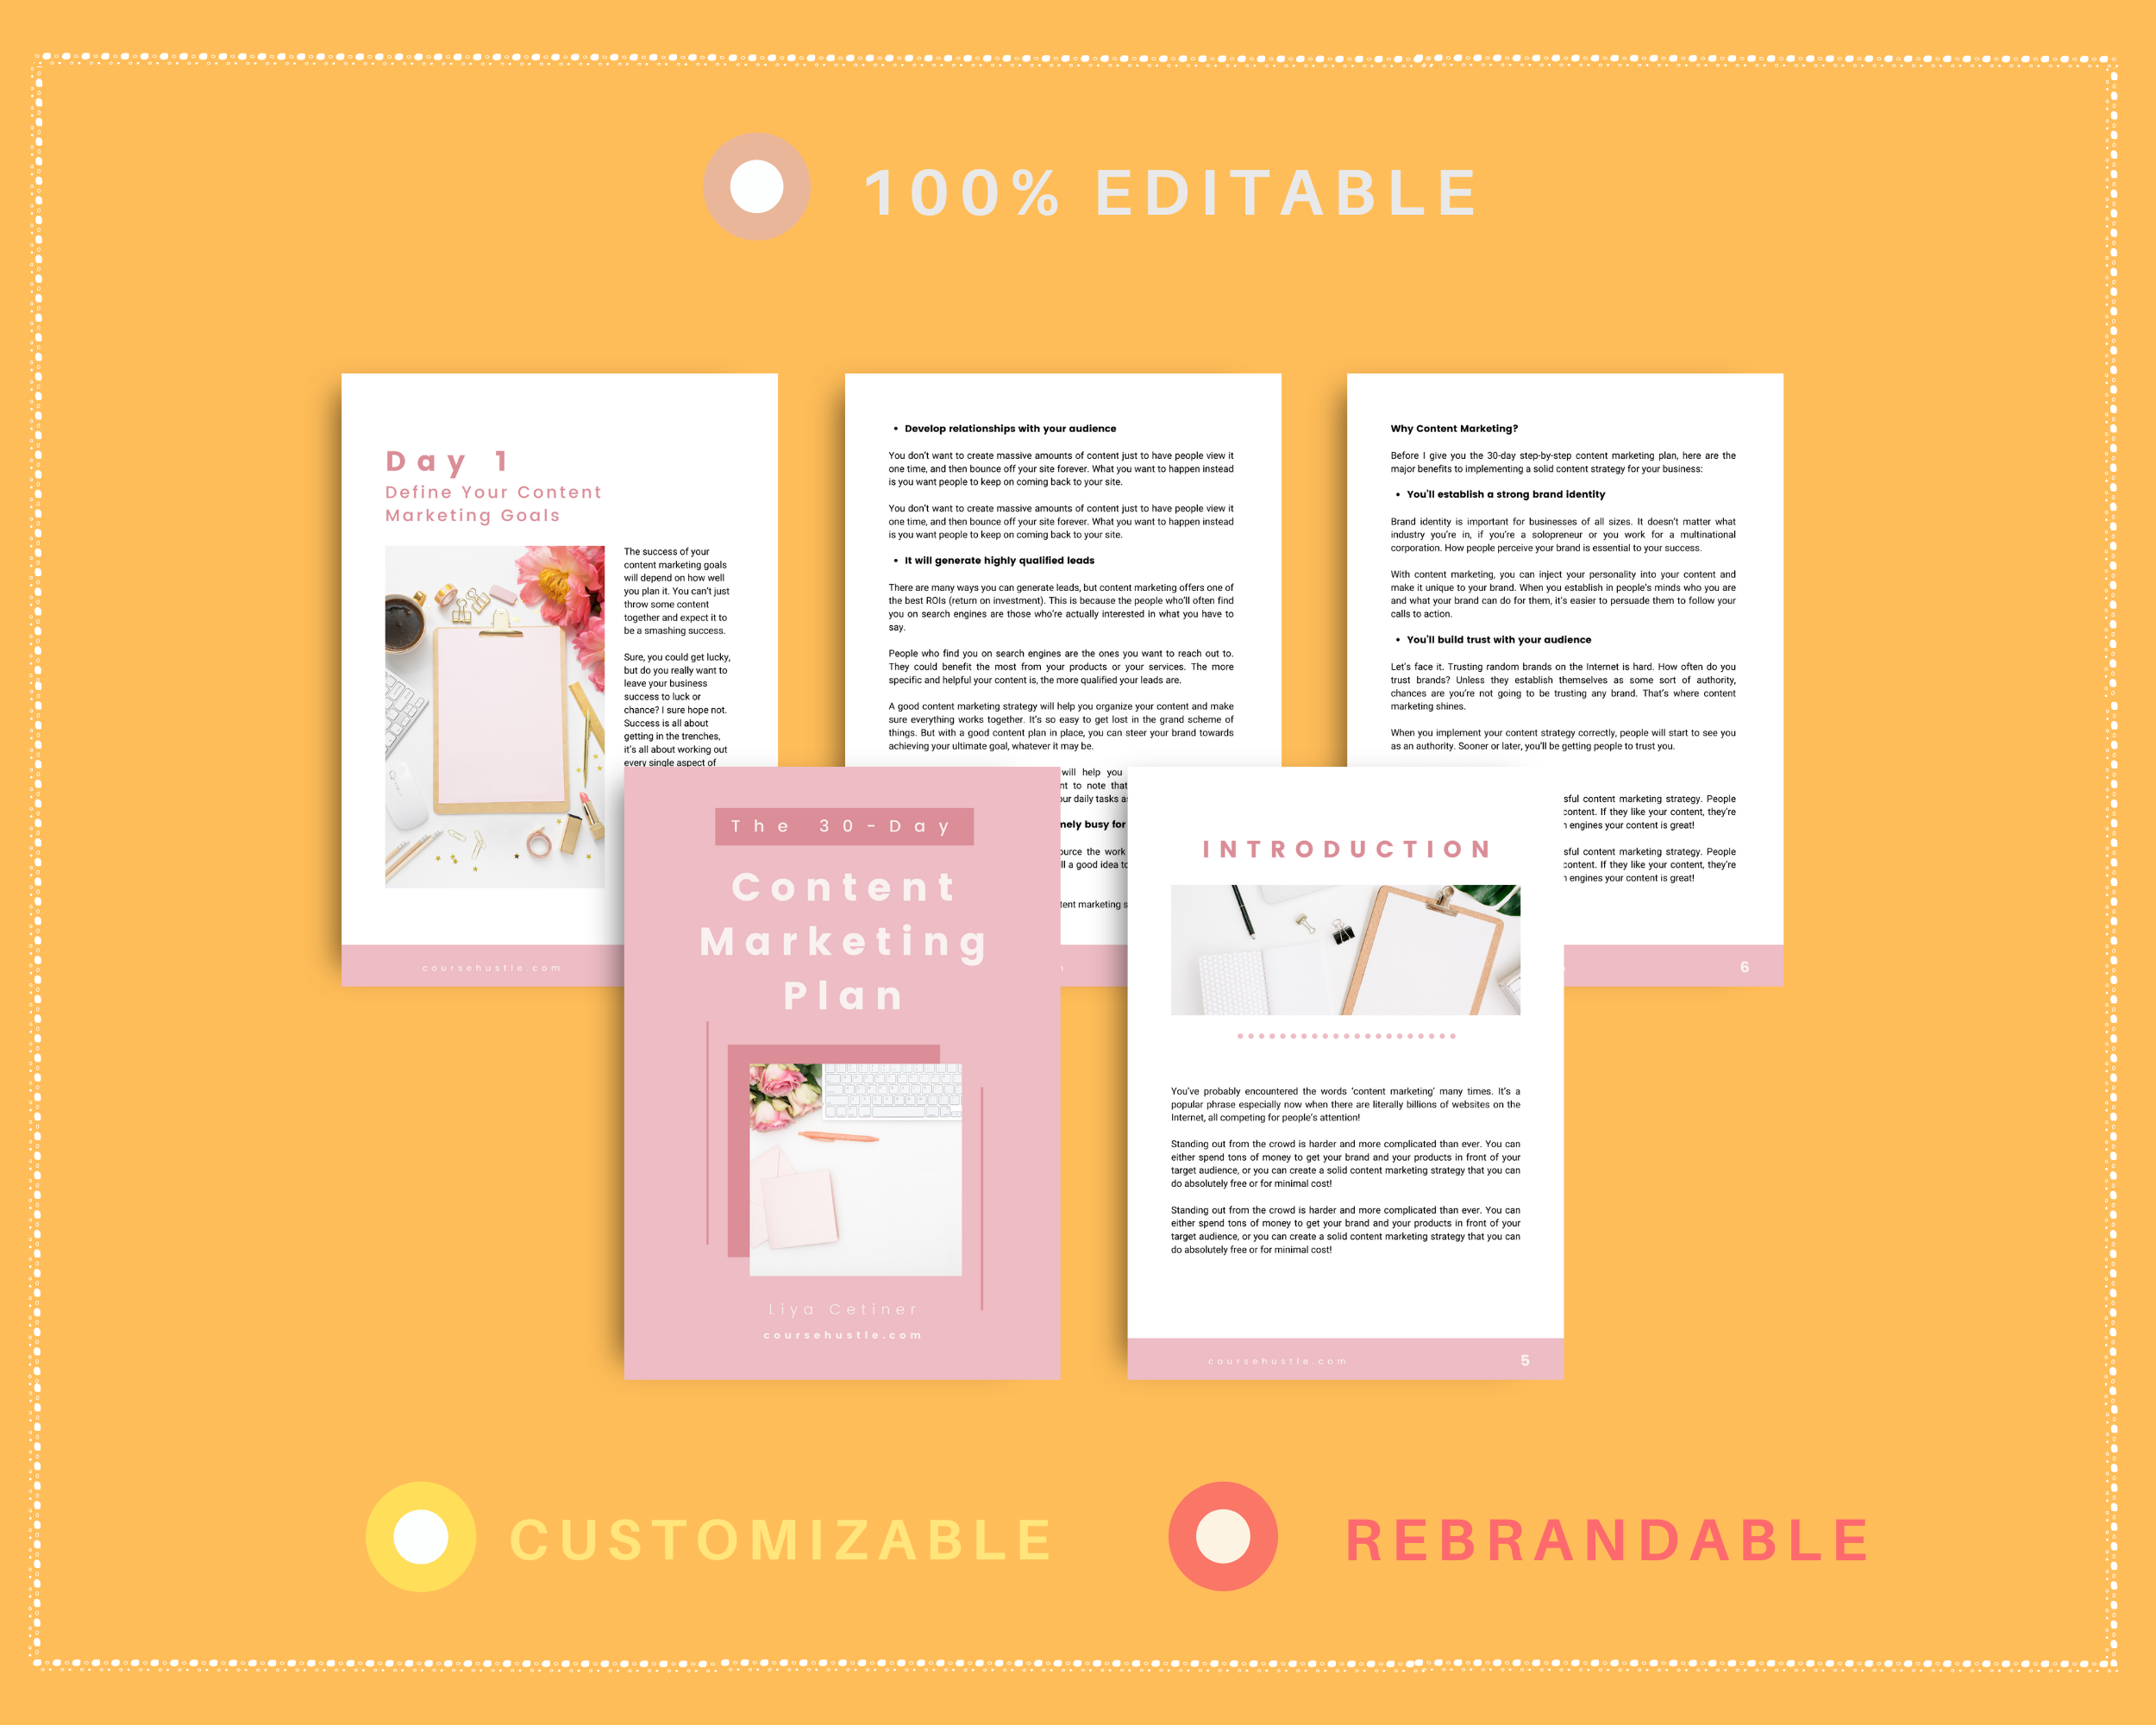 Done for You Content Marketing Playbook in Canva | Editable A4 Size Canva Template